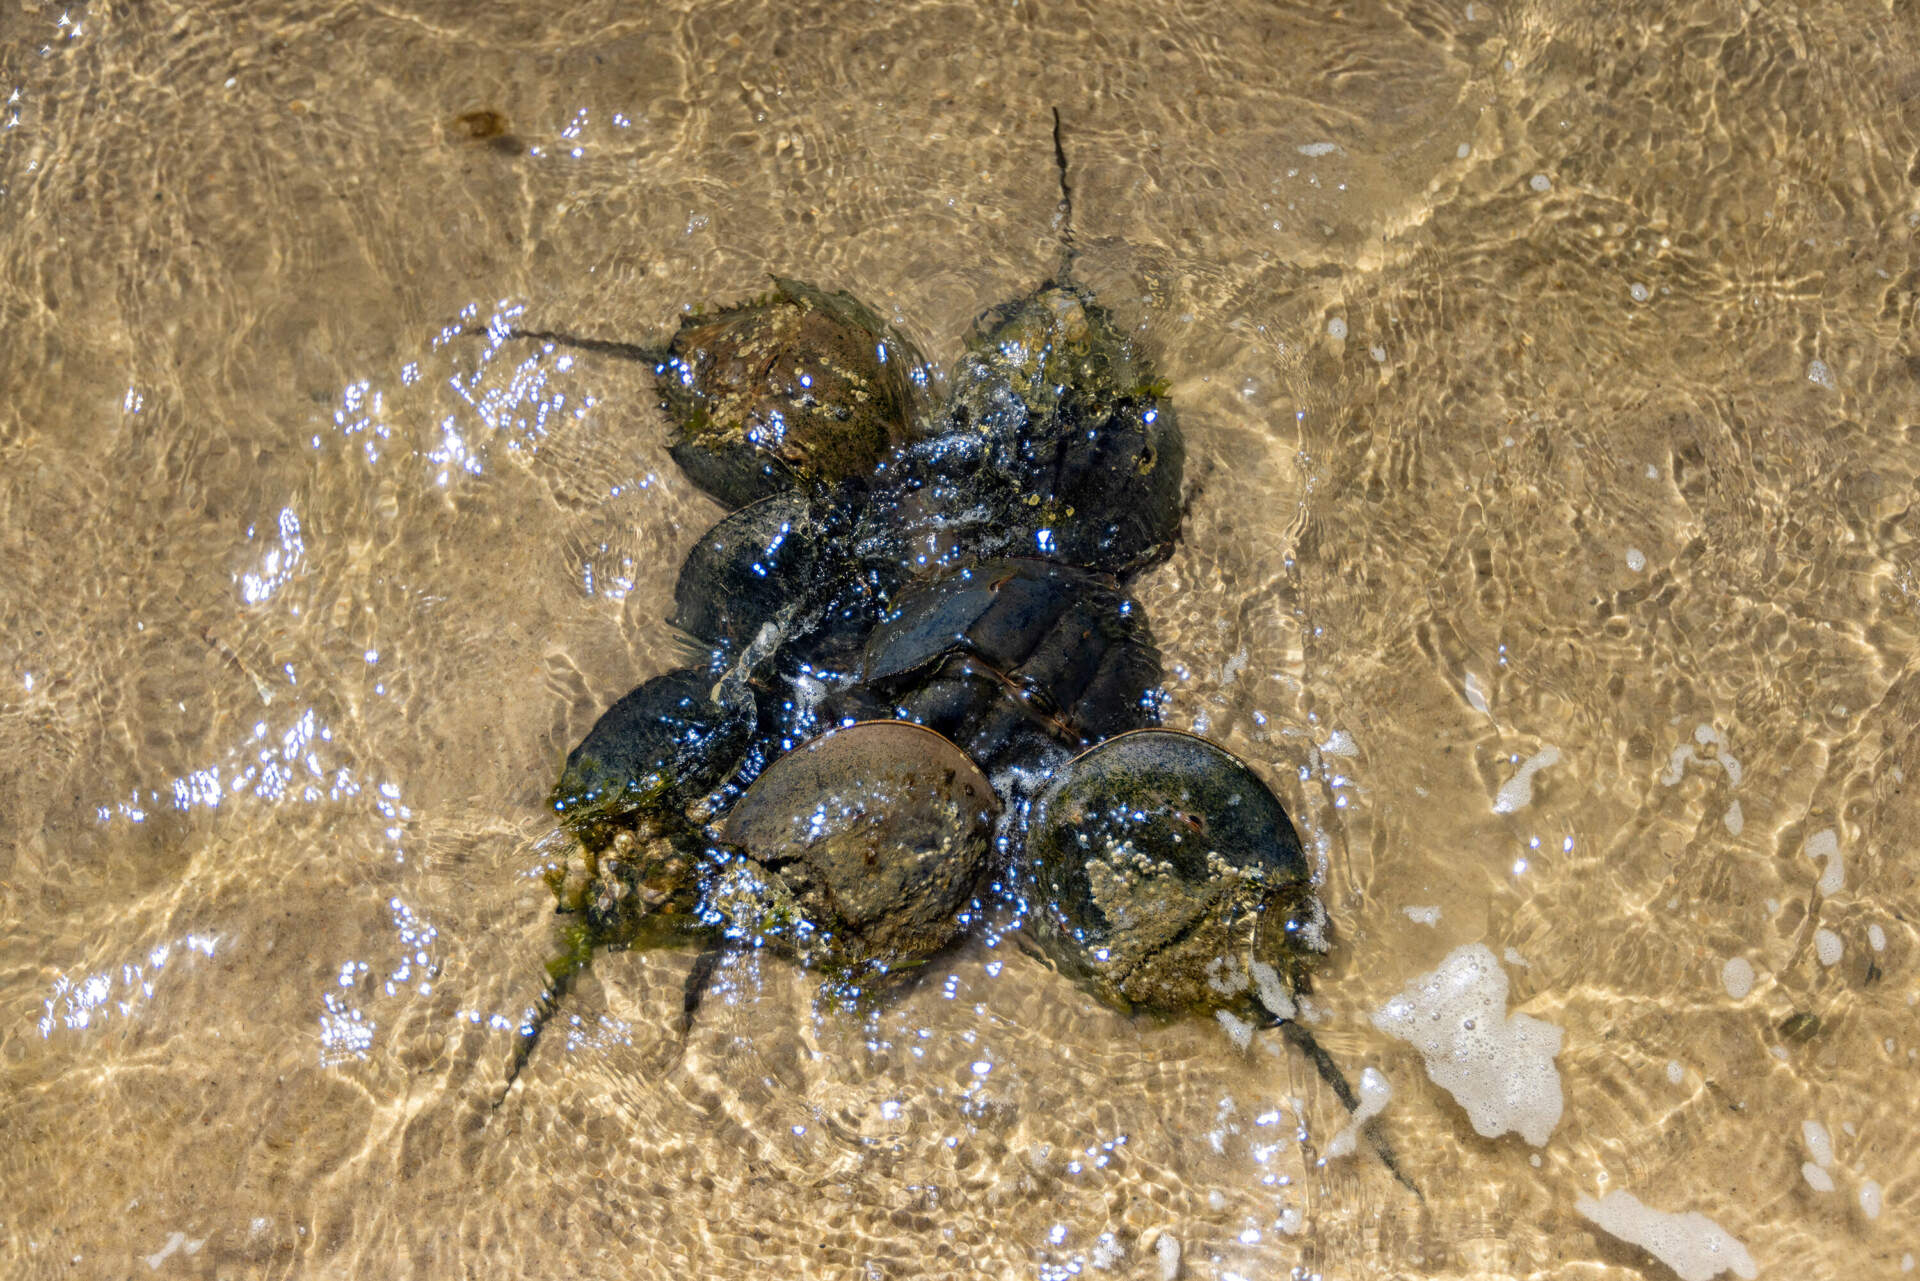 Male horseshoe crabs surround a female while she is laying eggs in the sand. (Jesse Costa/WBUR)